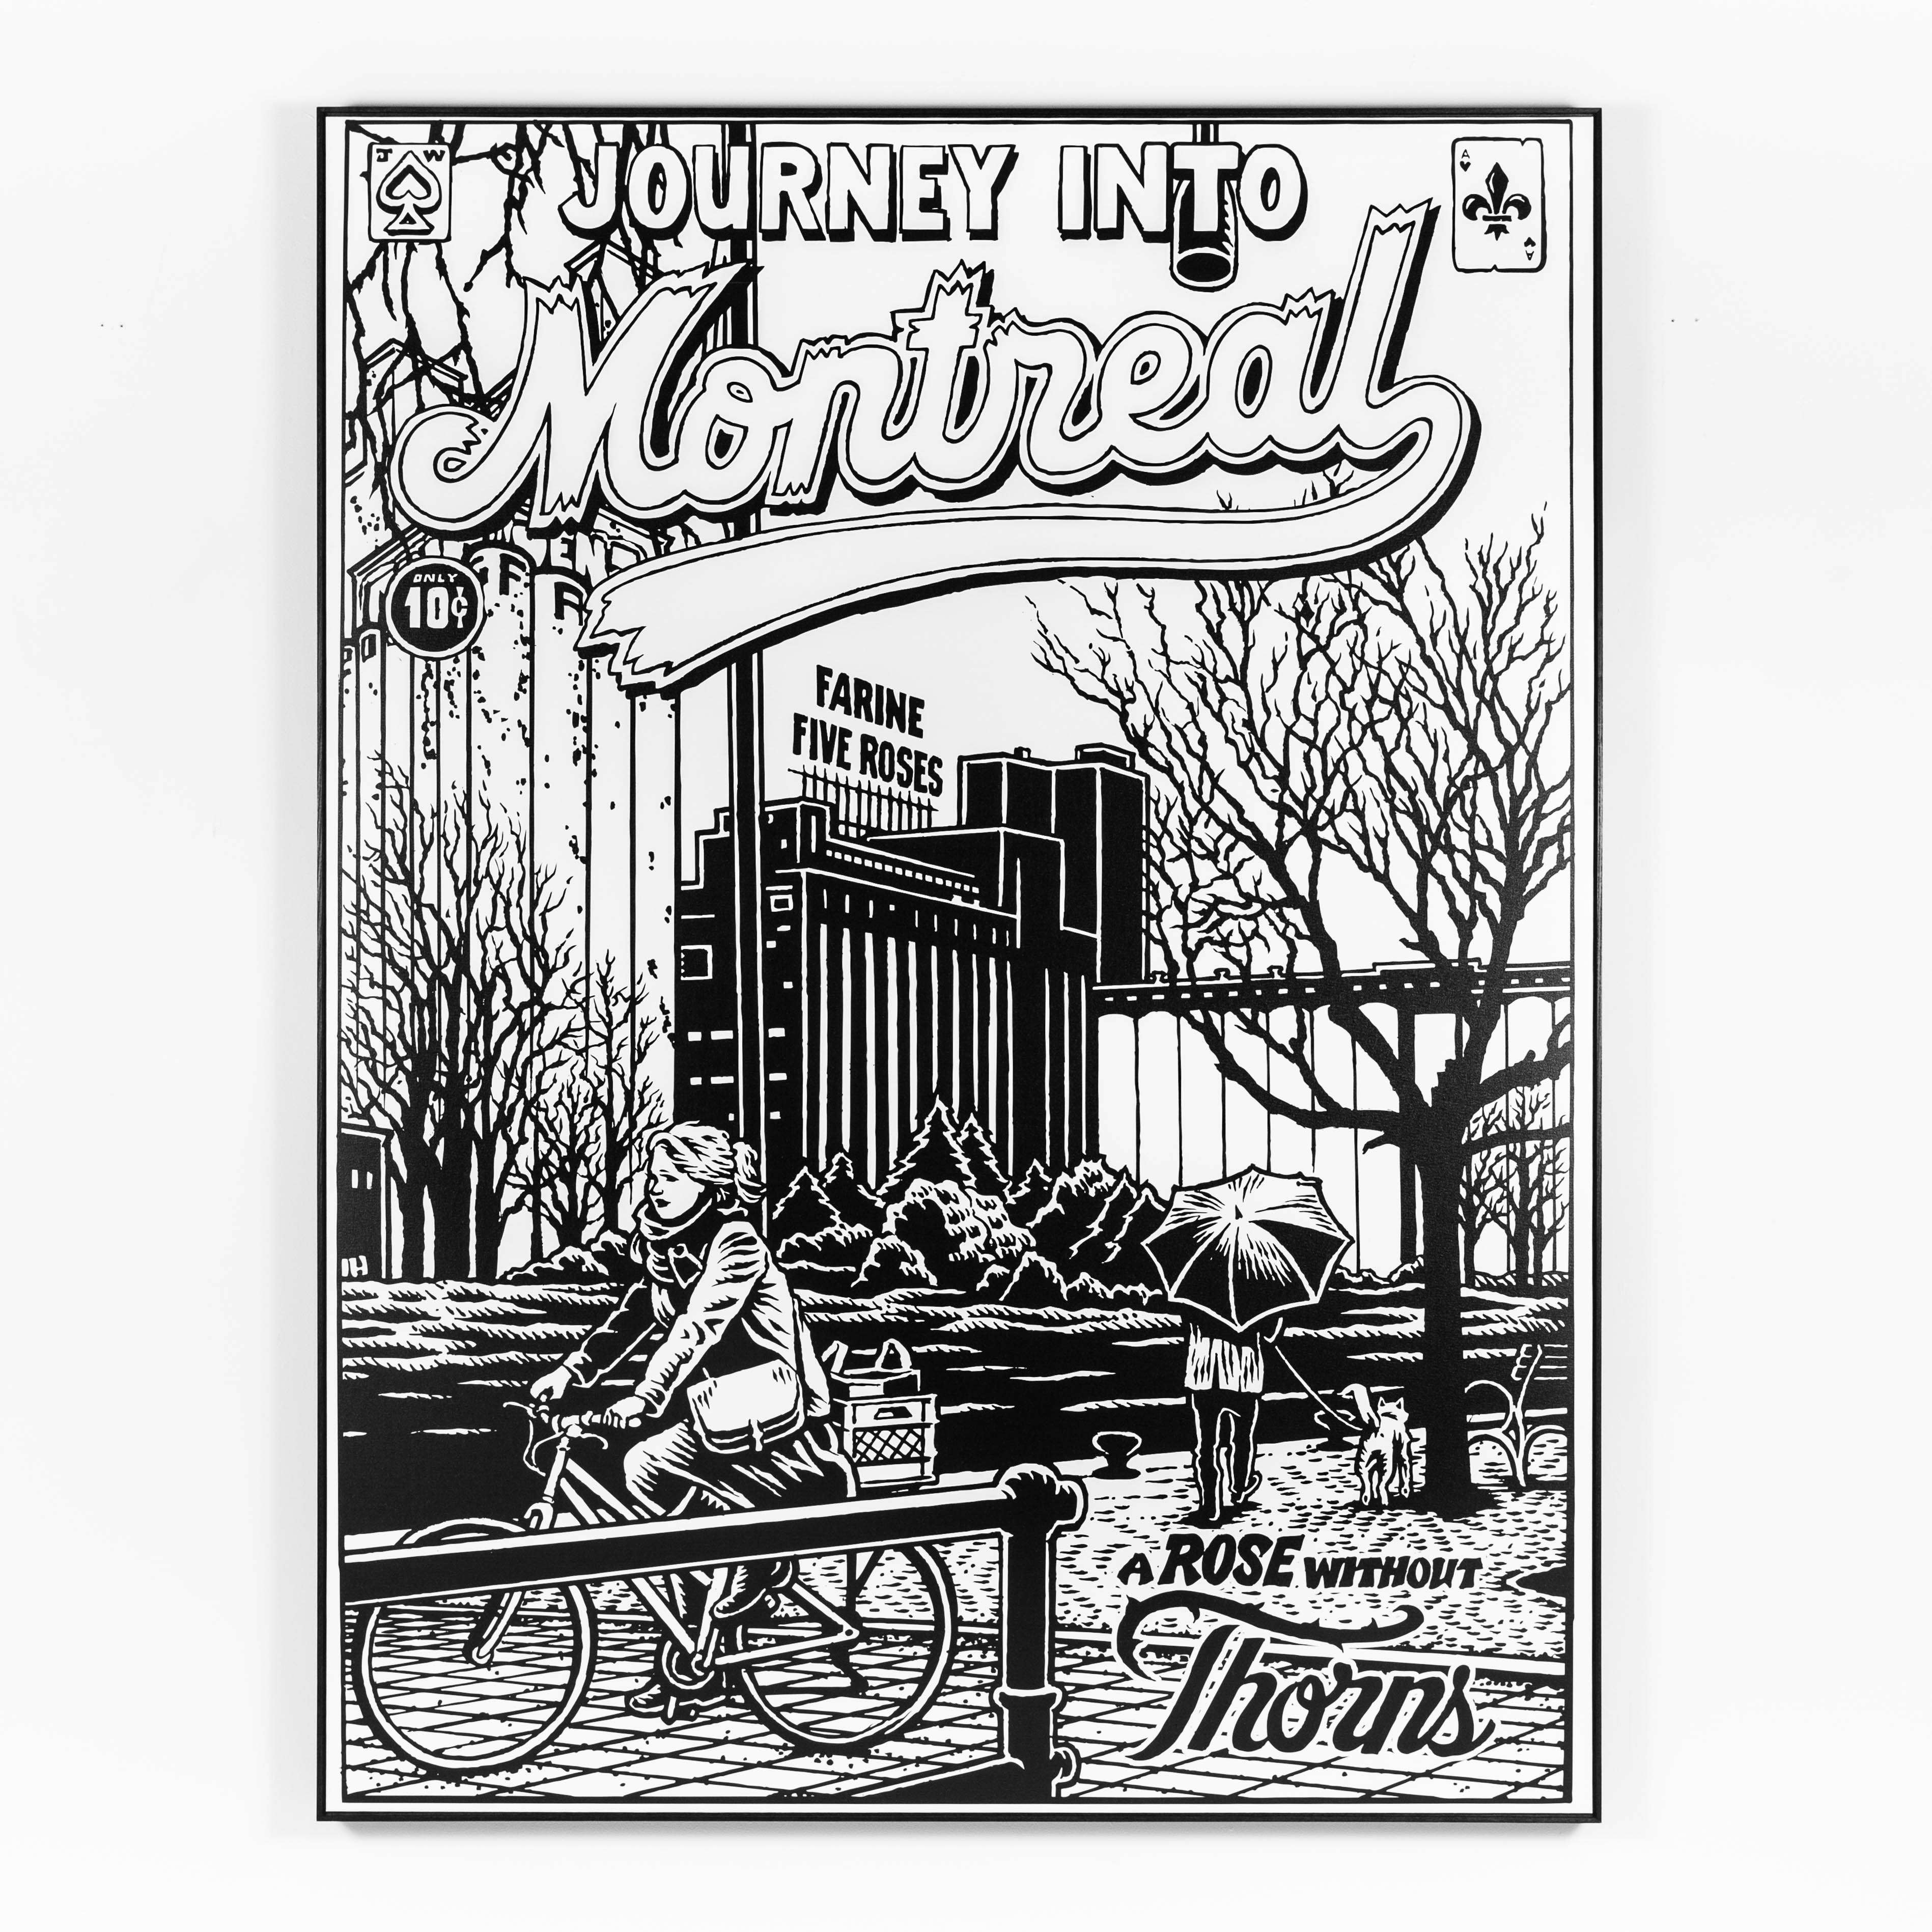 Jason Wasserman Journey Into Montreal - Farine Five Roses, on Canvas- Station 16 Editions